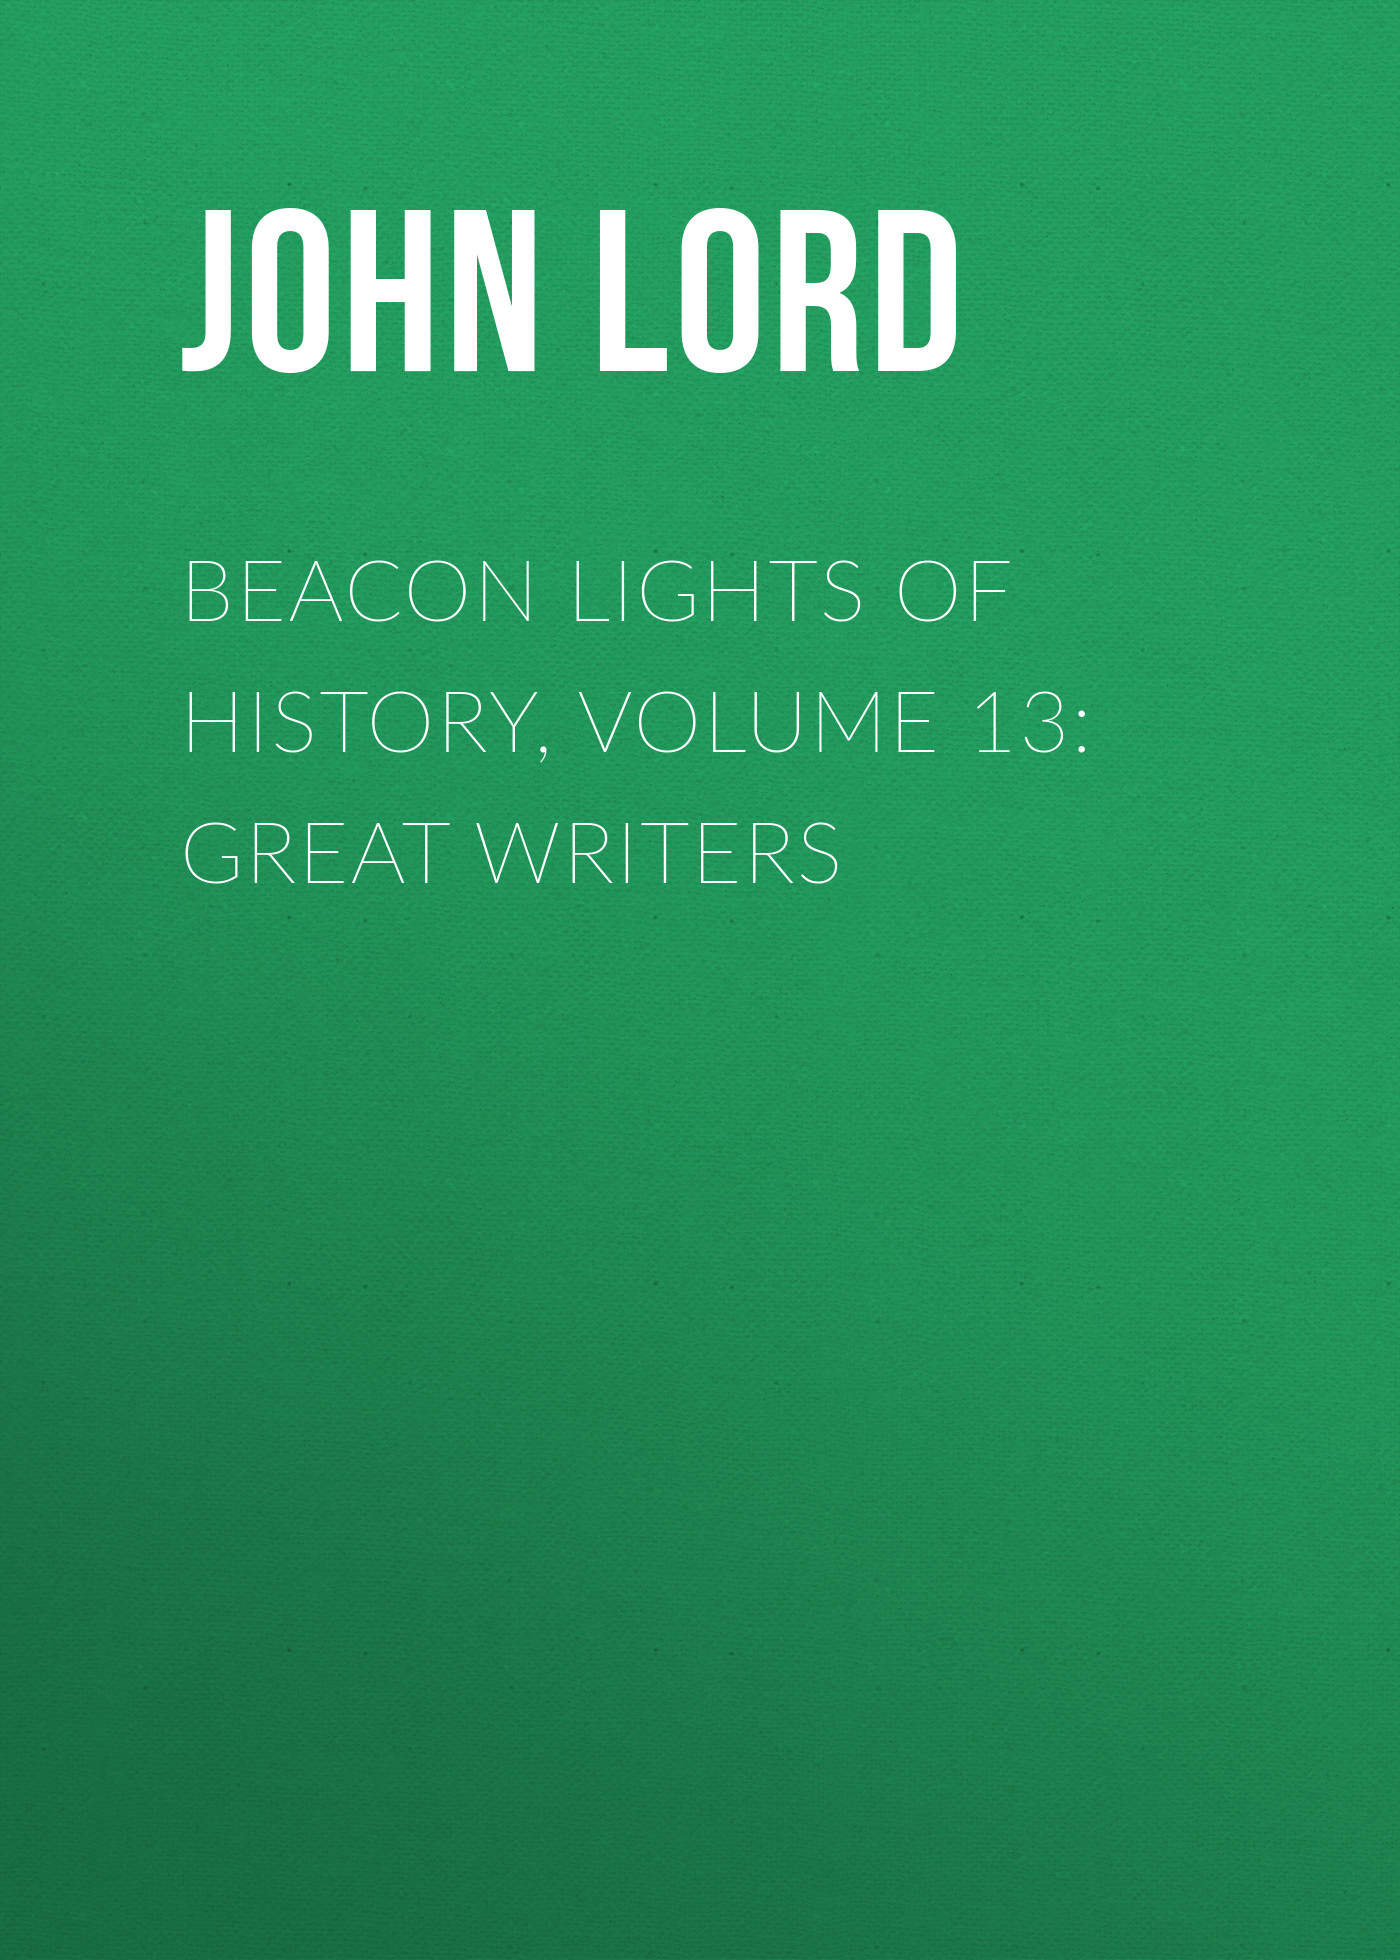 Beacon Lights of History, Volume 13: Great Writers